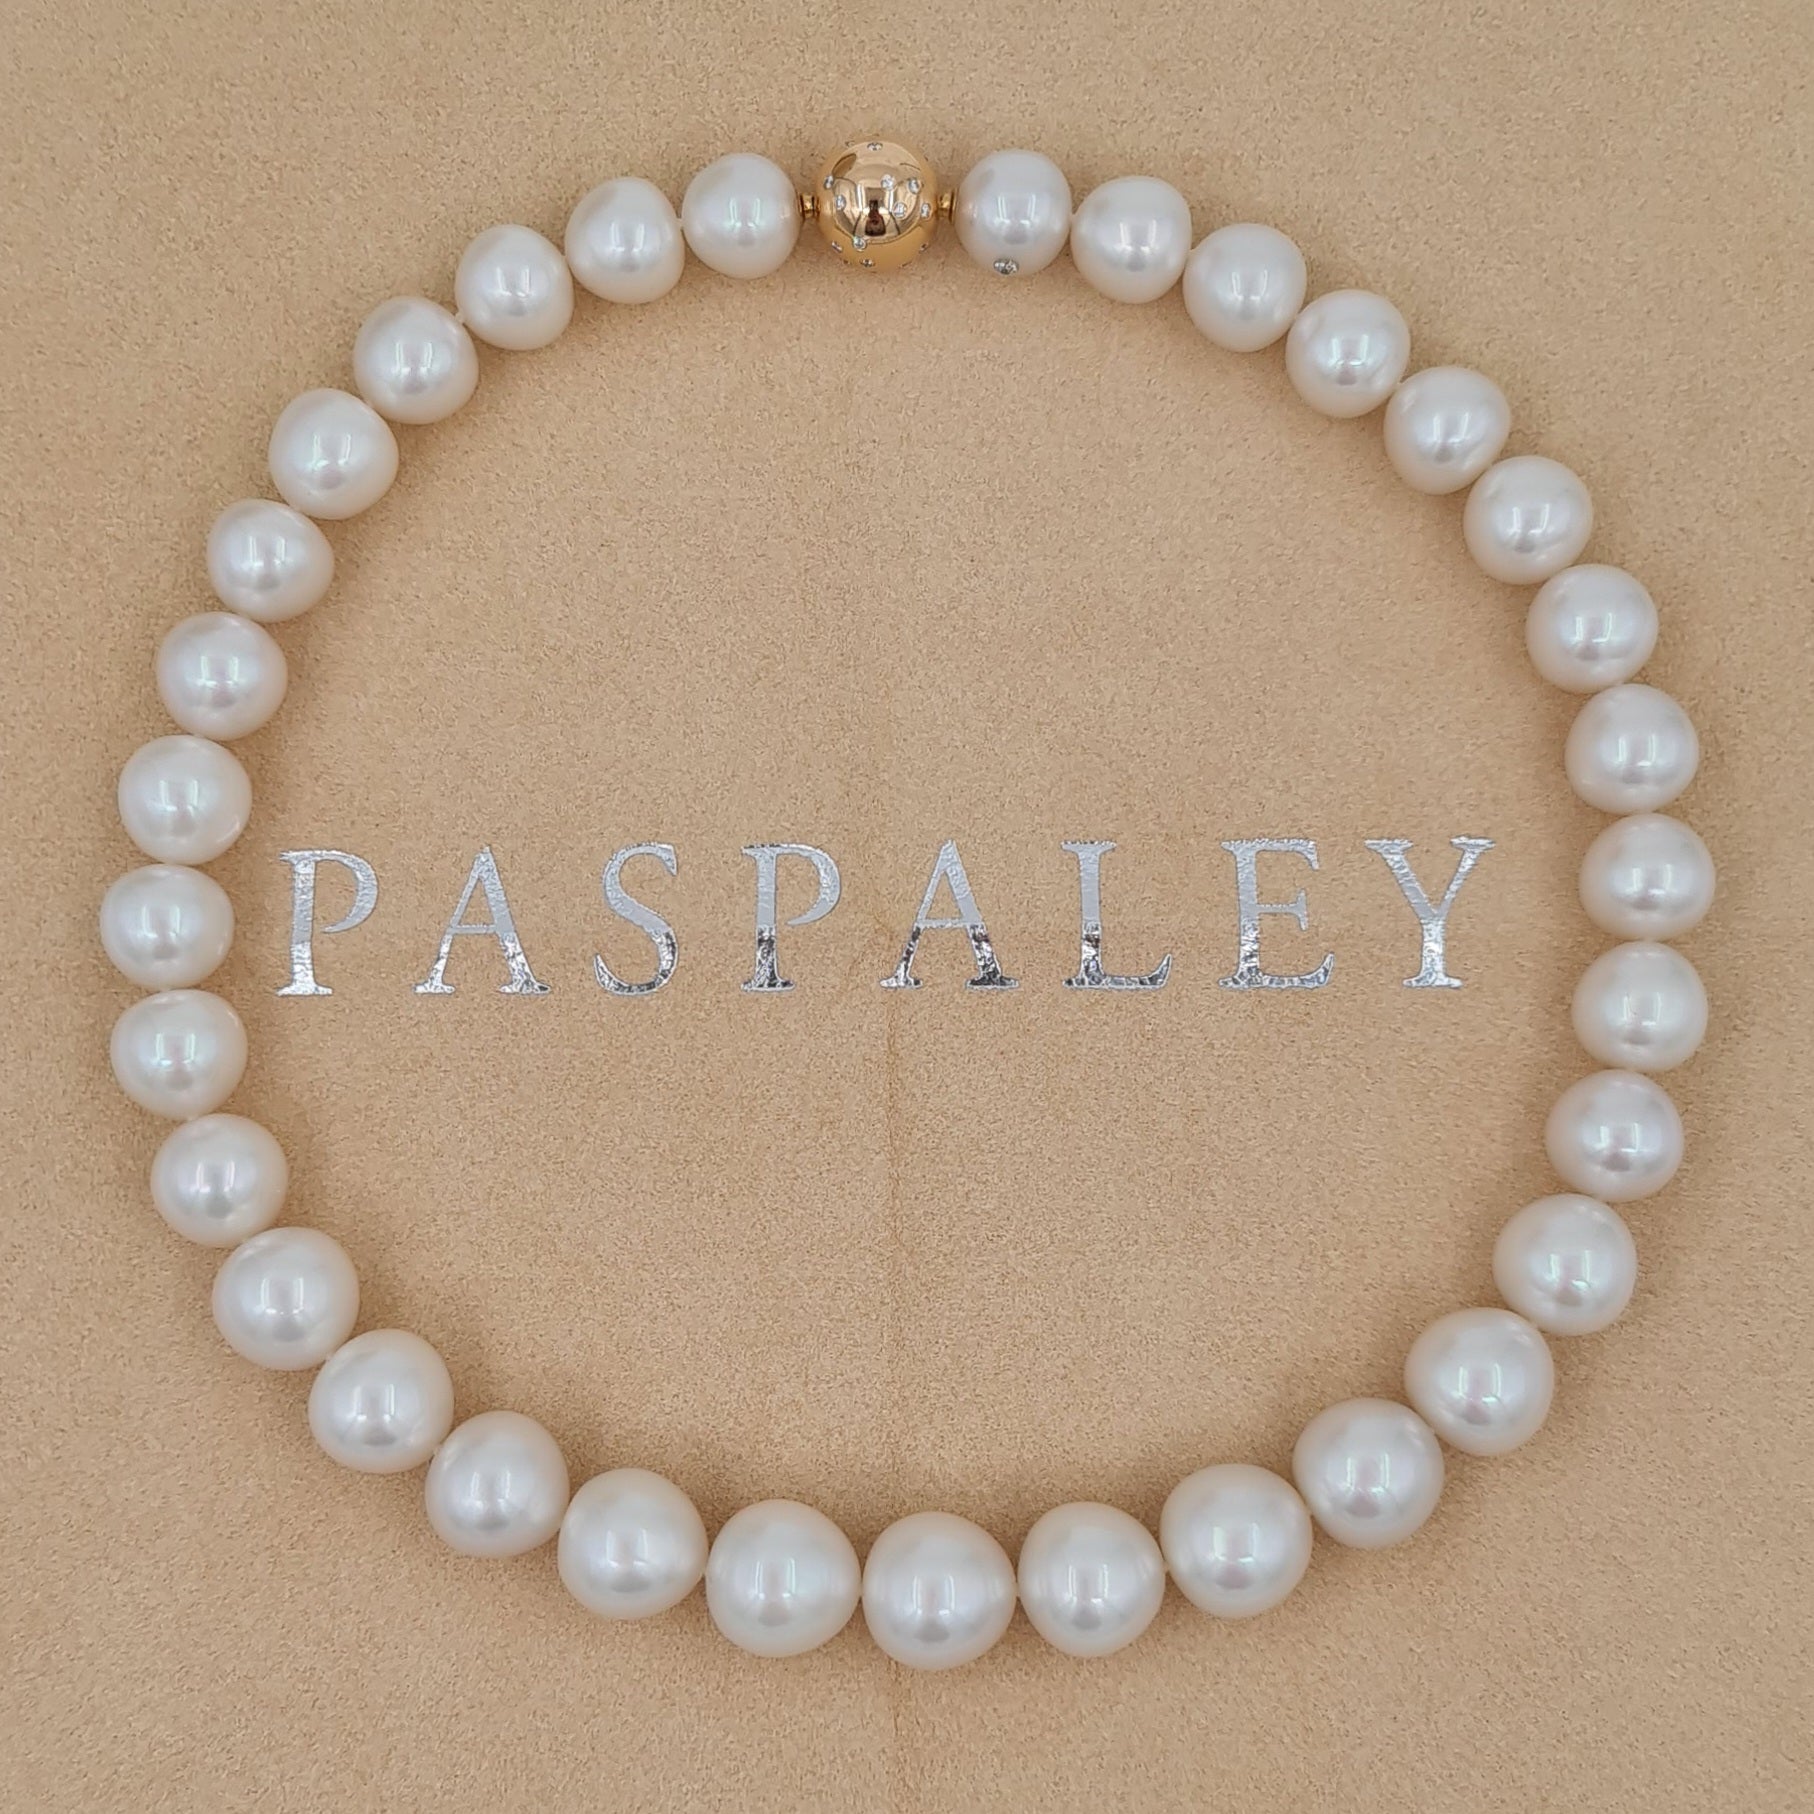 Paspaley Baroque Pearl Designs | One of the many unique desi… | Flickr